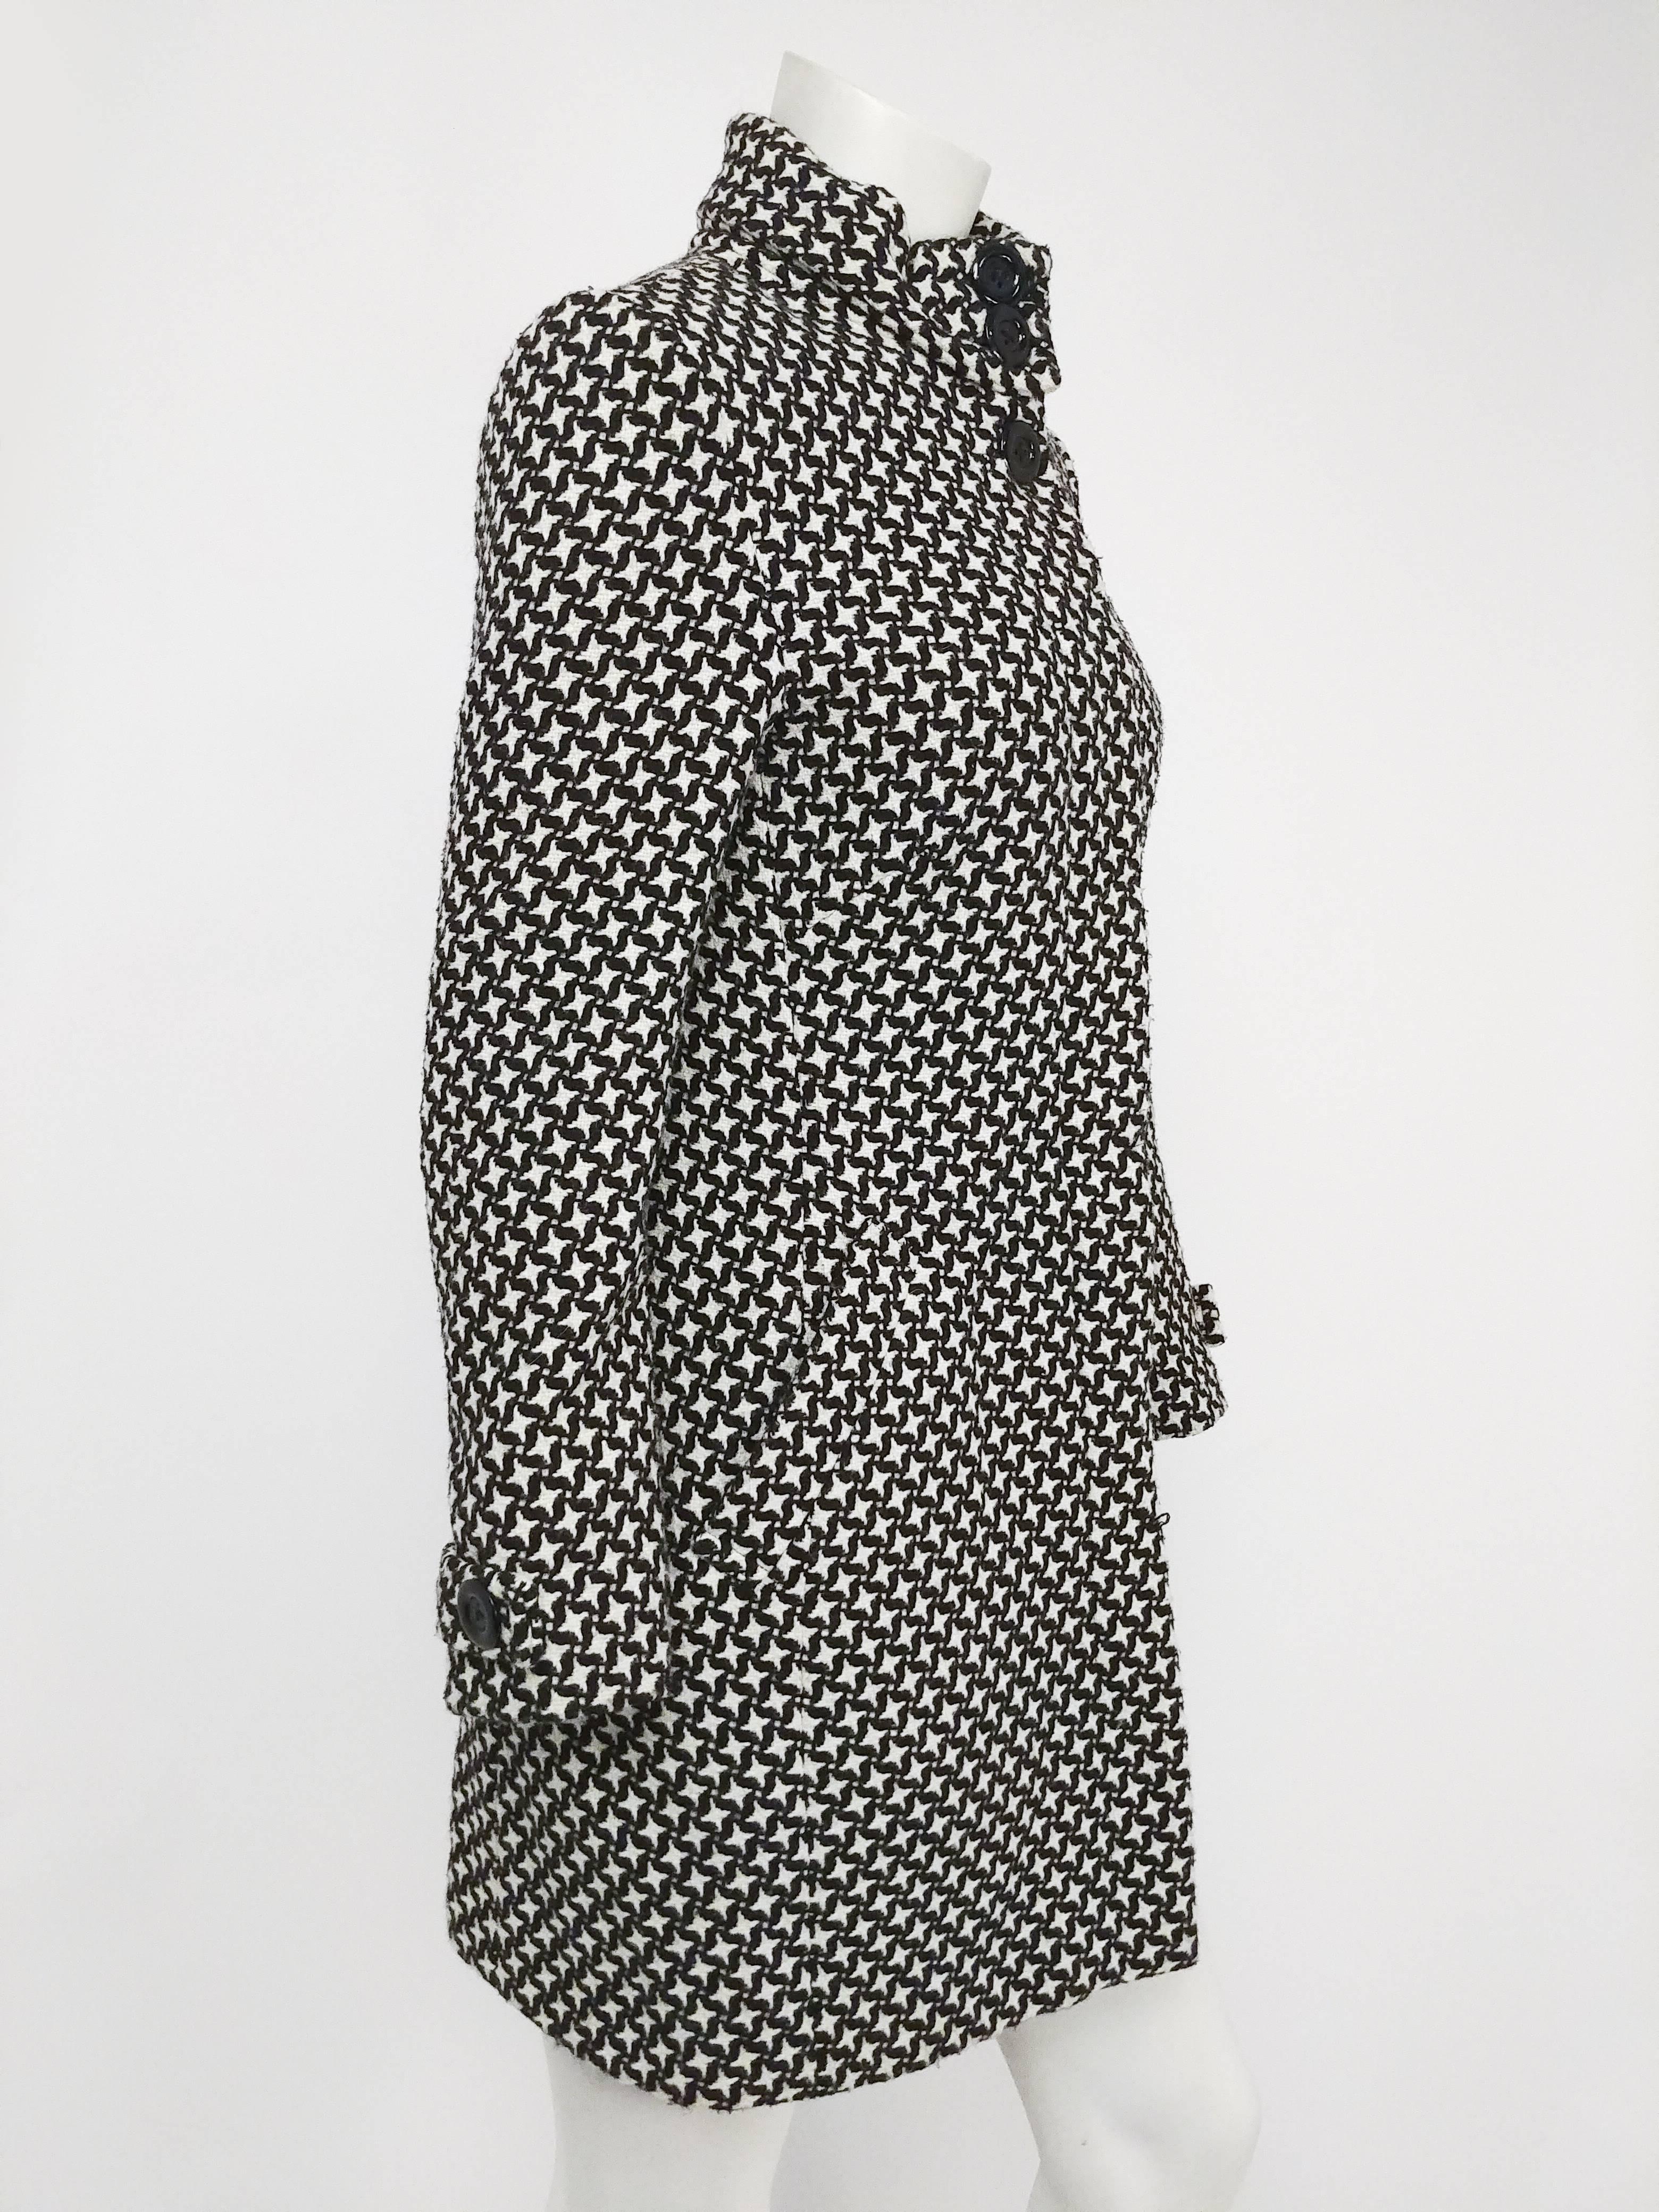 1960s Black & White Houndstooth Mod Coat. Straight waisted silhouette and mini-skirt length in a 1960s mod style. Hidden placket buttons up front, high collar. Two side pockets. Bright yellow lining adds touch of fun and color.